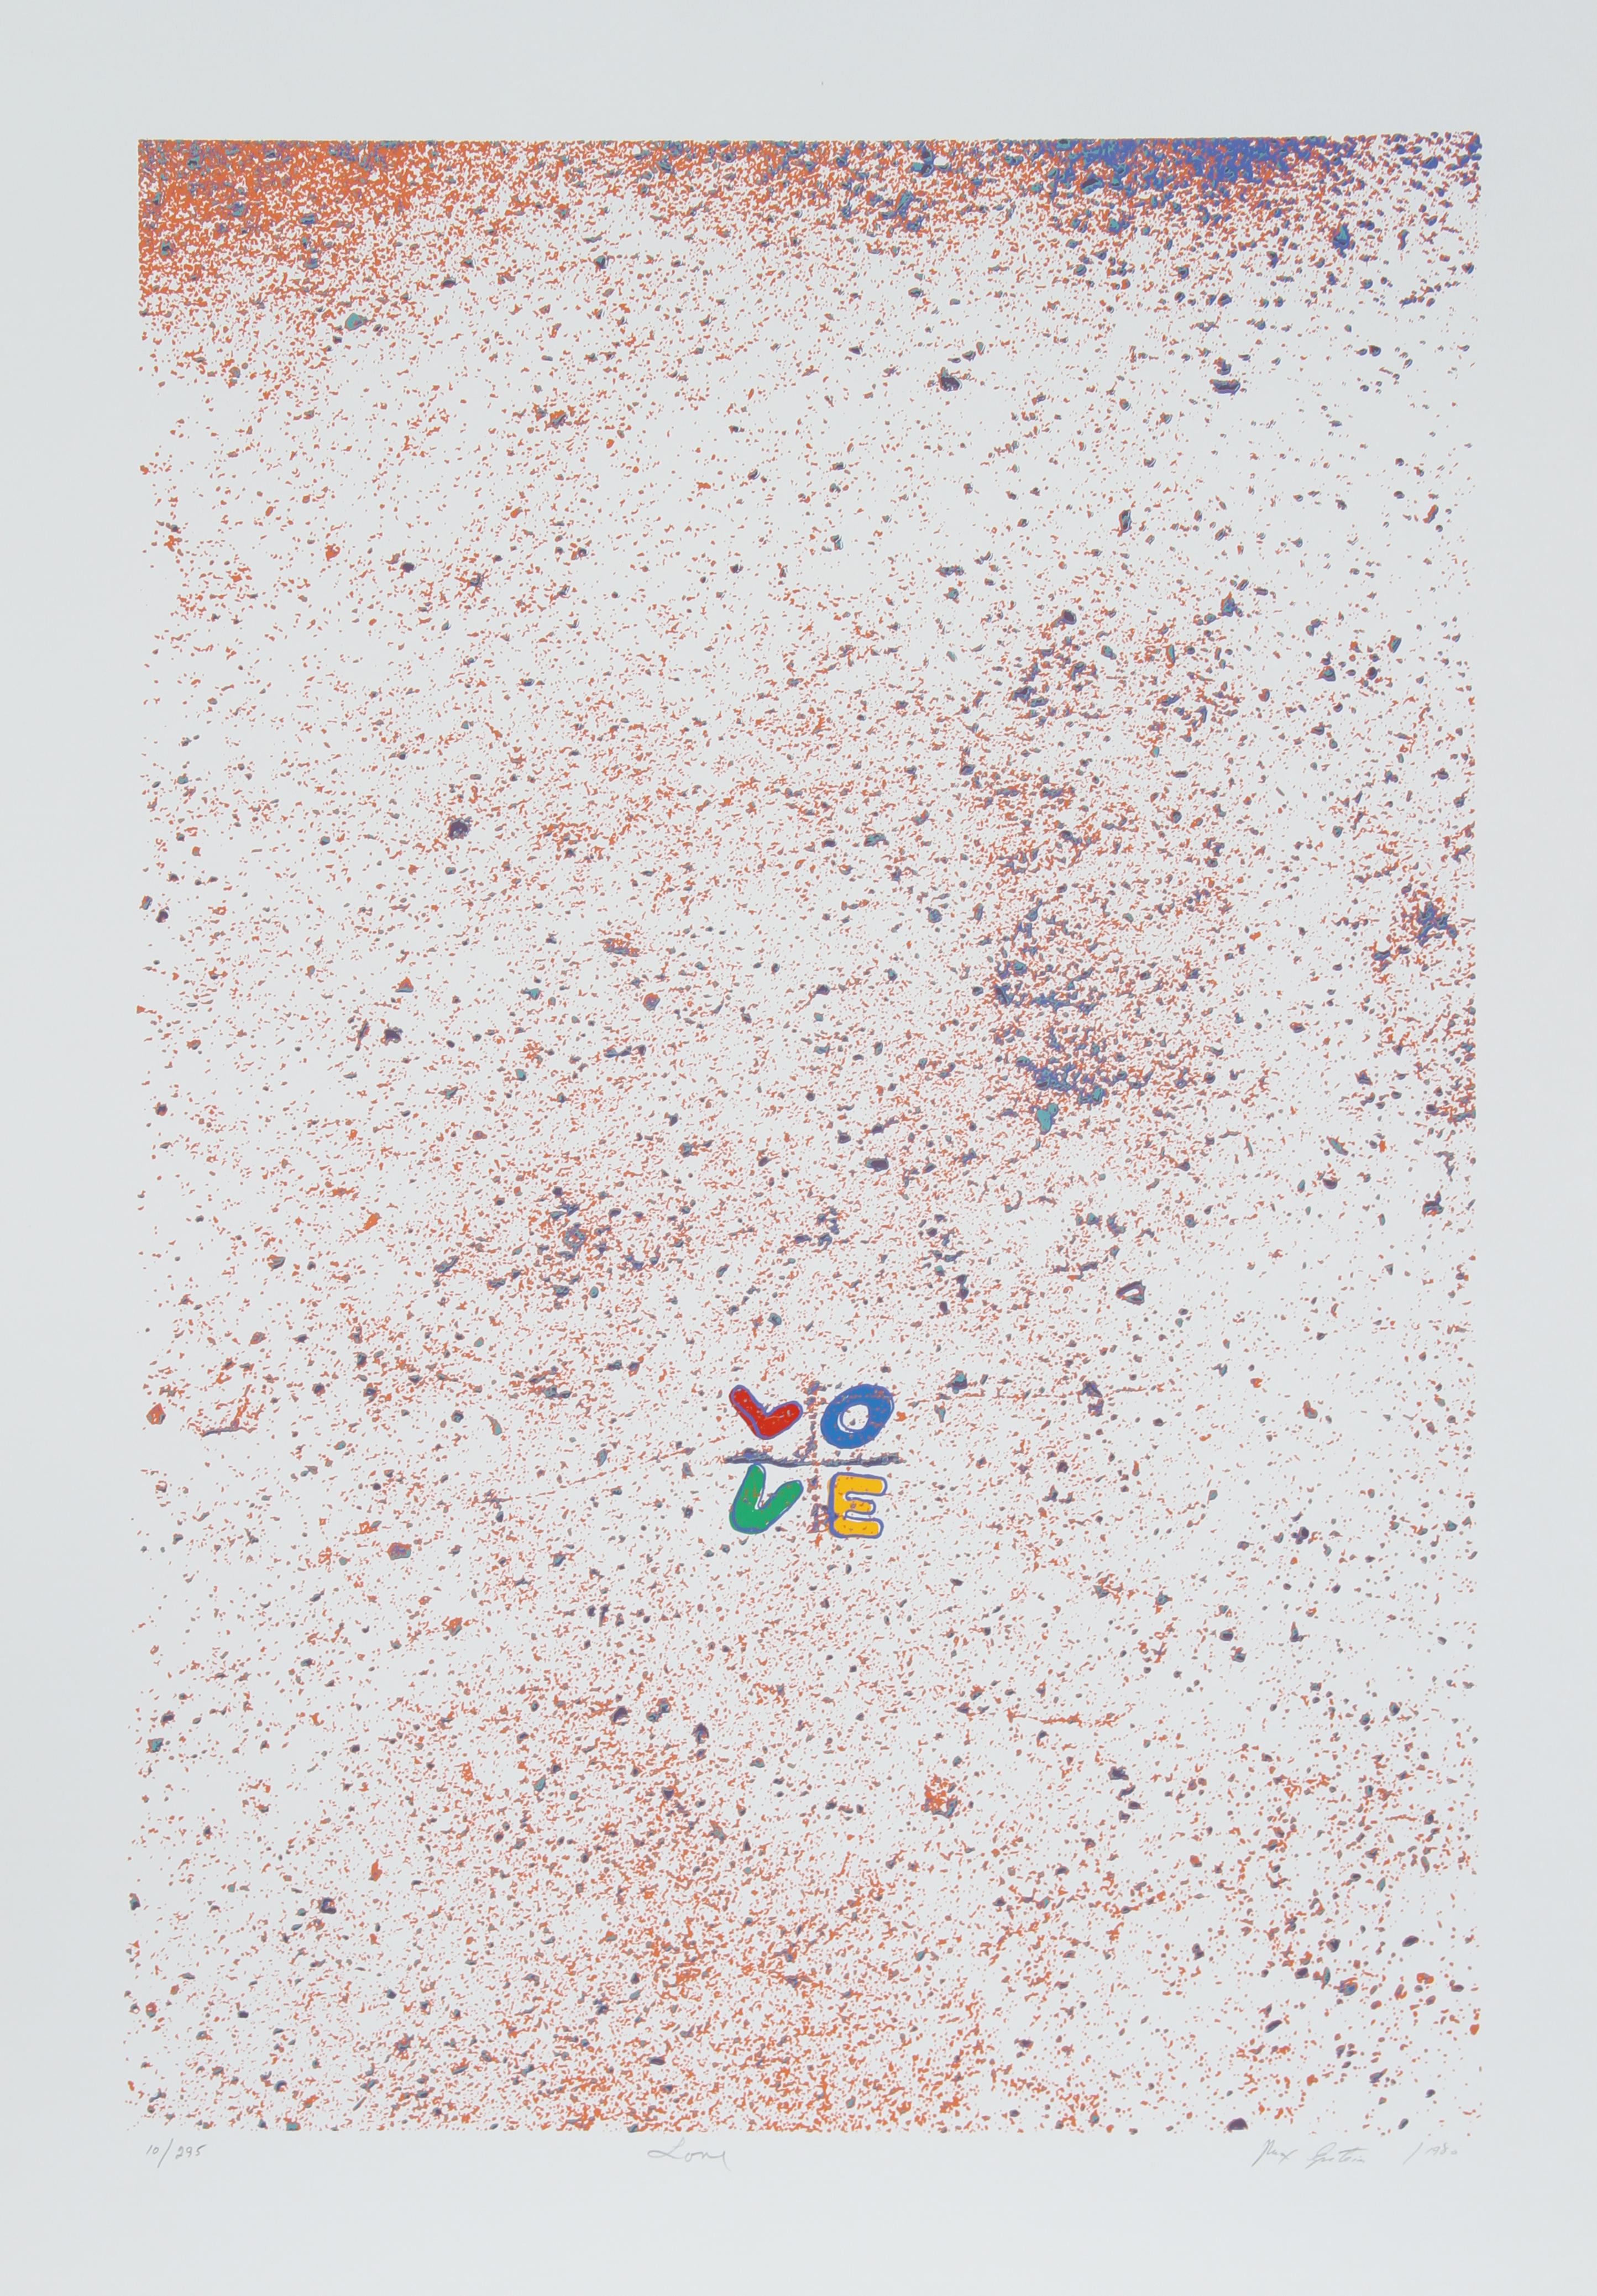 Artist:  Max Epstein, Canadian (1932 - 2002)
Title:  Love
Year:  1980
Medium:  Screenprint, signed and numbered in pencil
Edition:  295
Image Size:  29 x 18.5 inches
Size:  35 in. x 23 in. (88.9 cm x 58.42 cm)